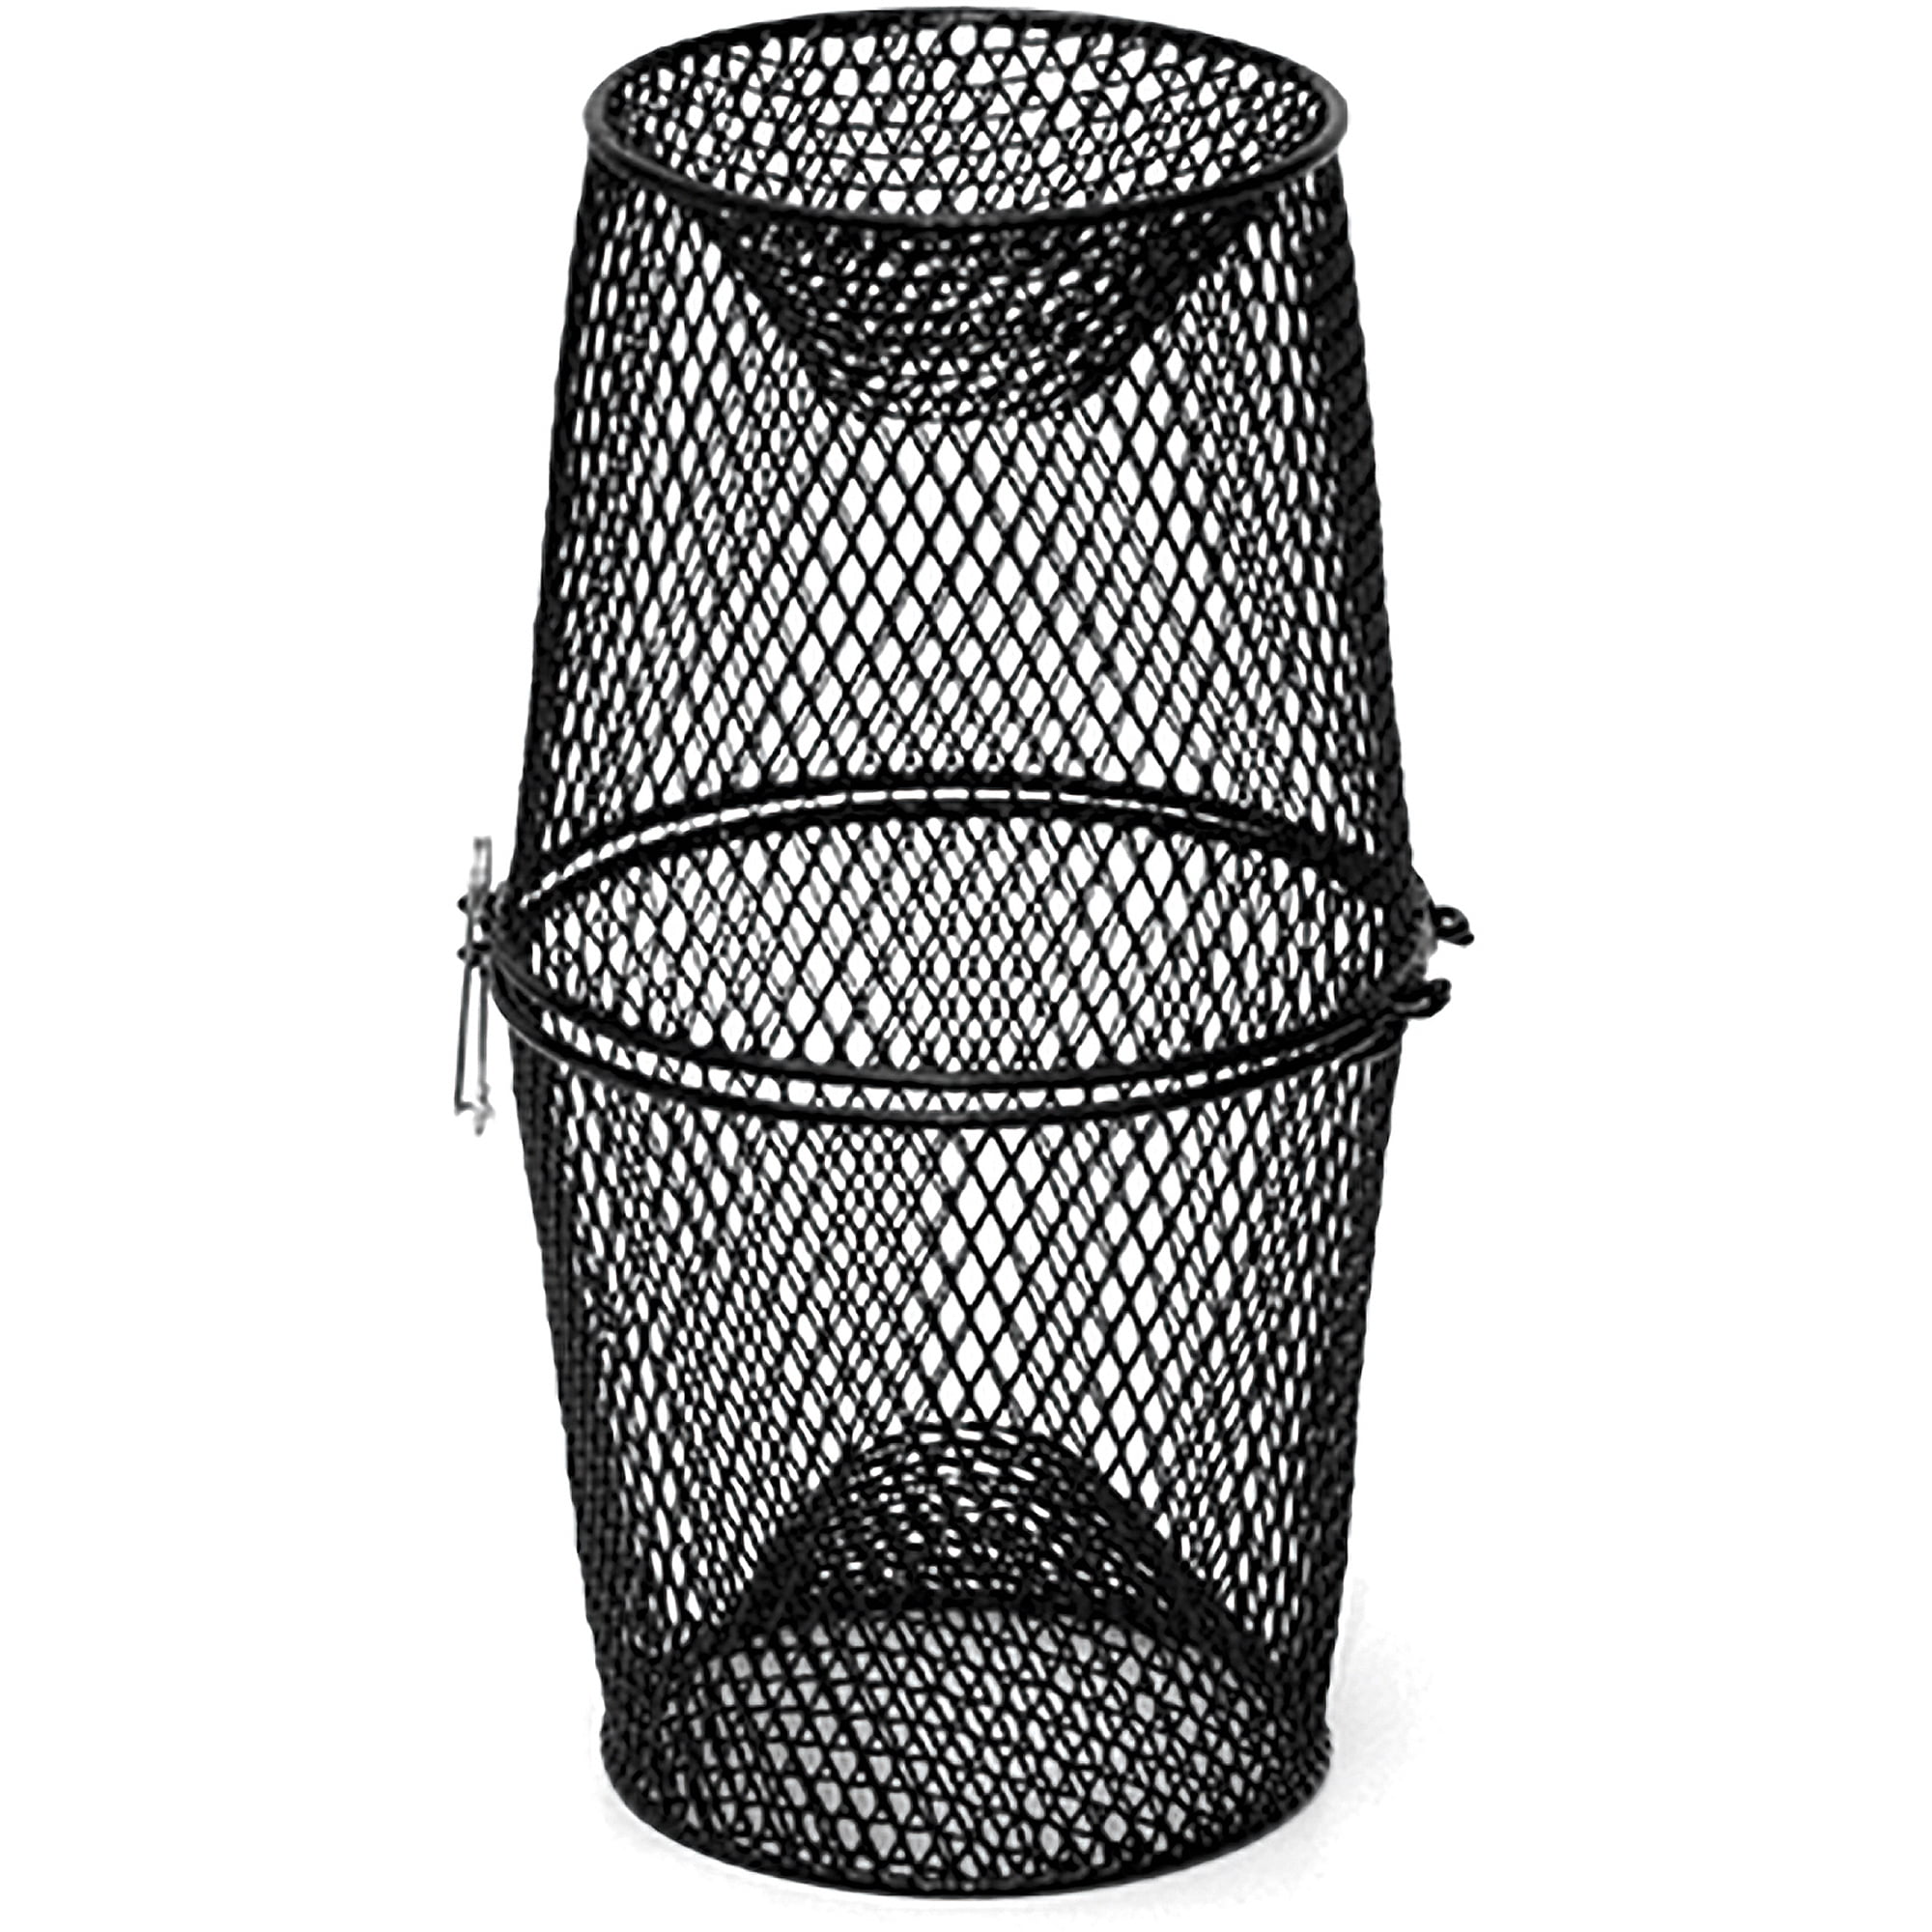 G-40 Small Collapsible Galvanized Wire Metal Mesh Saltwater Live Minnow Trap Kit 